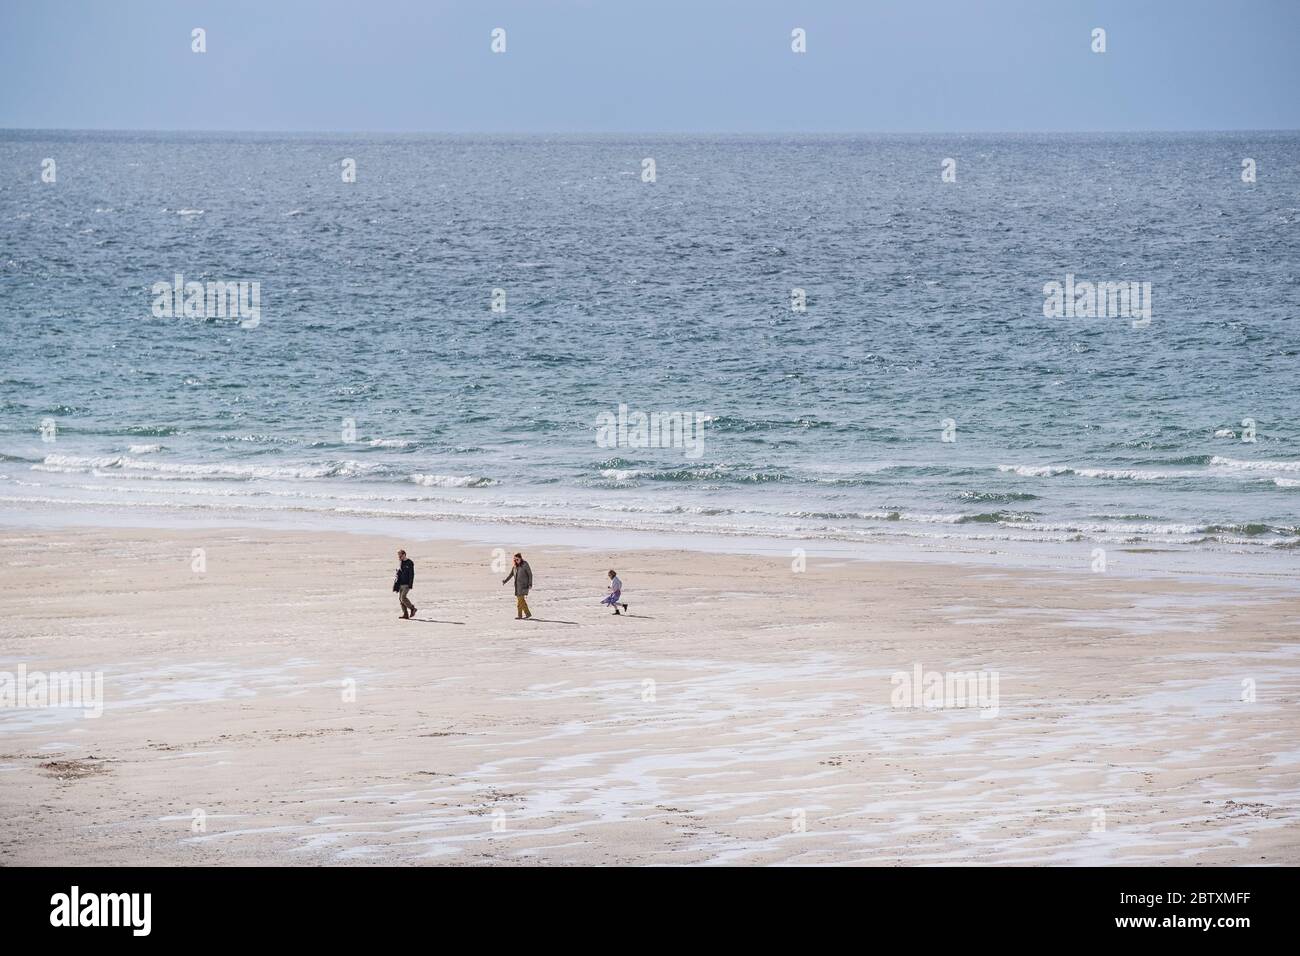 Due to the Coronavirus Covid 19 pandemic the normally busy Fistral Beach is now empty except for three people walking along the shoreline in Newquay i Stock Photo